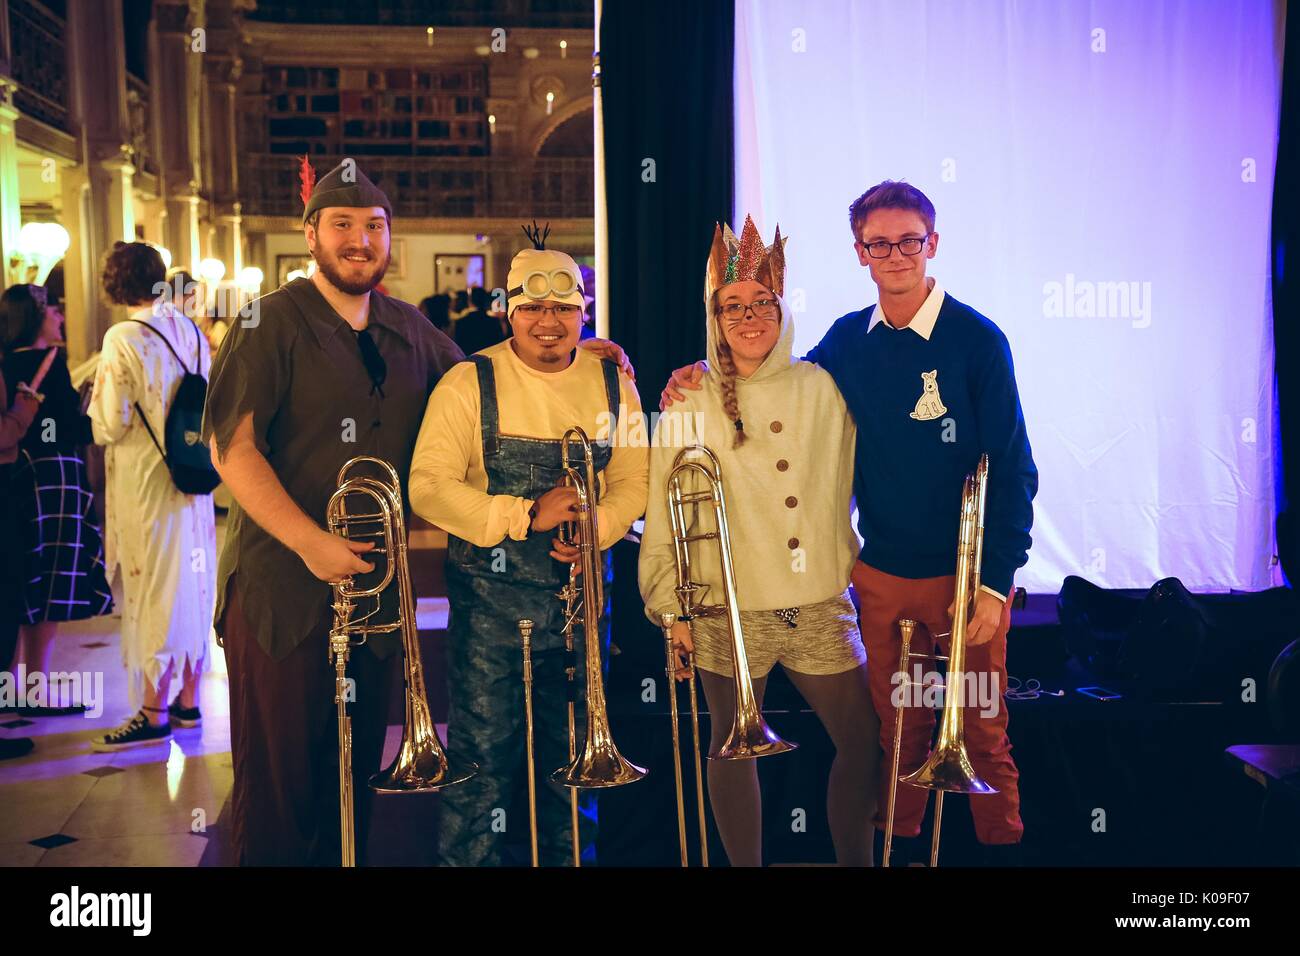 Four students all holding trombones dressed in costumes, the leftmost male student dressed as Peter pan, the male student second from the left dressed as a Minion from the film 'Despicable Me'; the female student second from the rights wearing a shining crown and cat make up, the rightmost male student wearing a blue sweater with a drawing pinned onto his chest and orange pants; Halloween at Peabody, October 31, 2015. Stock Photo